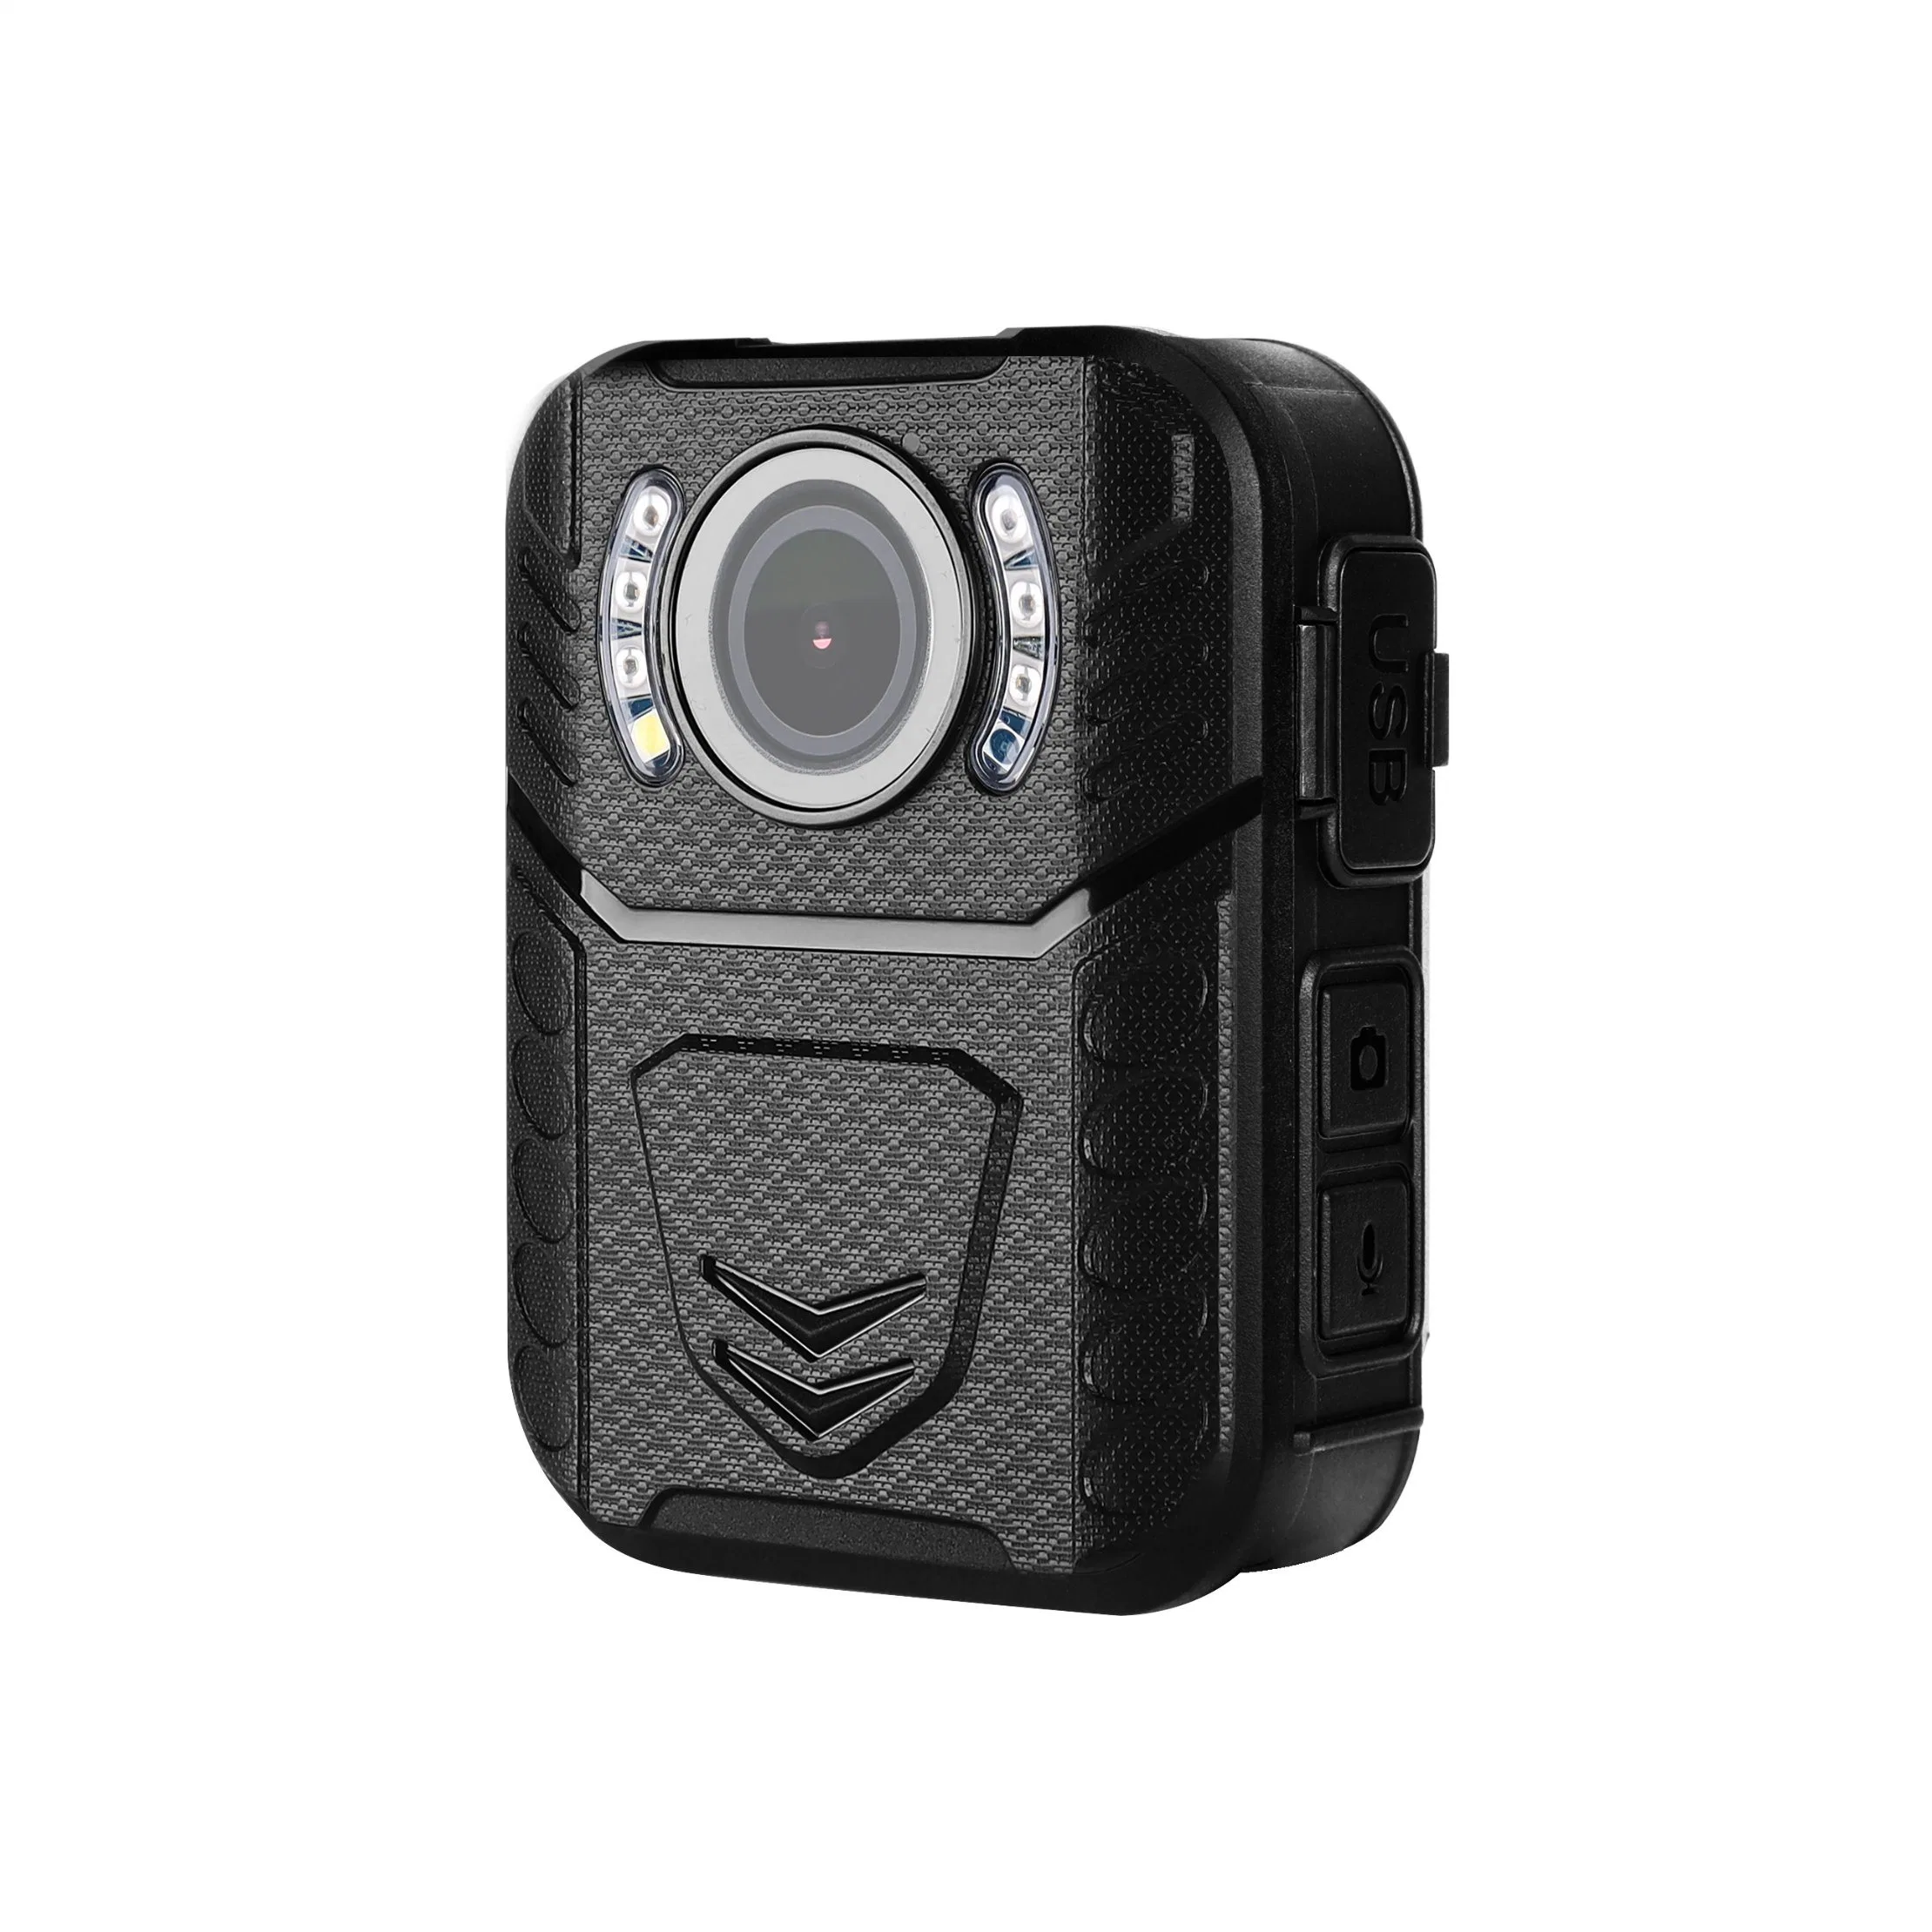 Different Accessories Mount Holder Body Camera for Civilians with Audio and Video in Day Time and Night Time